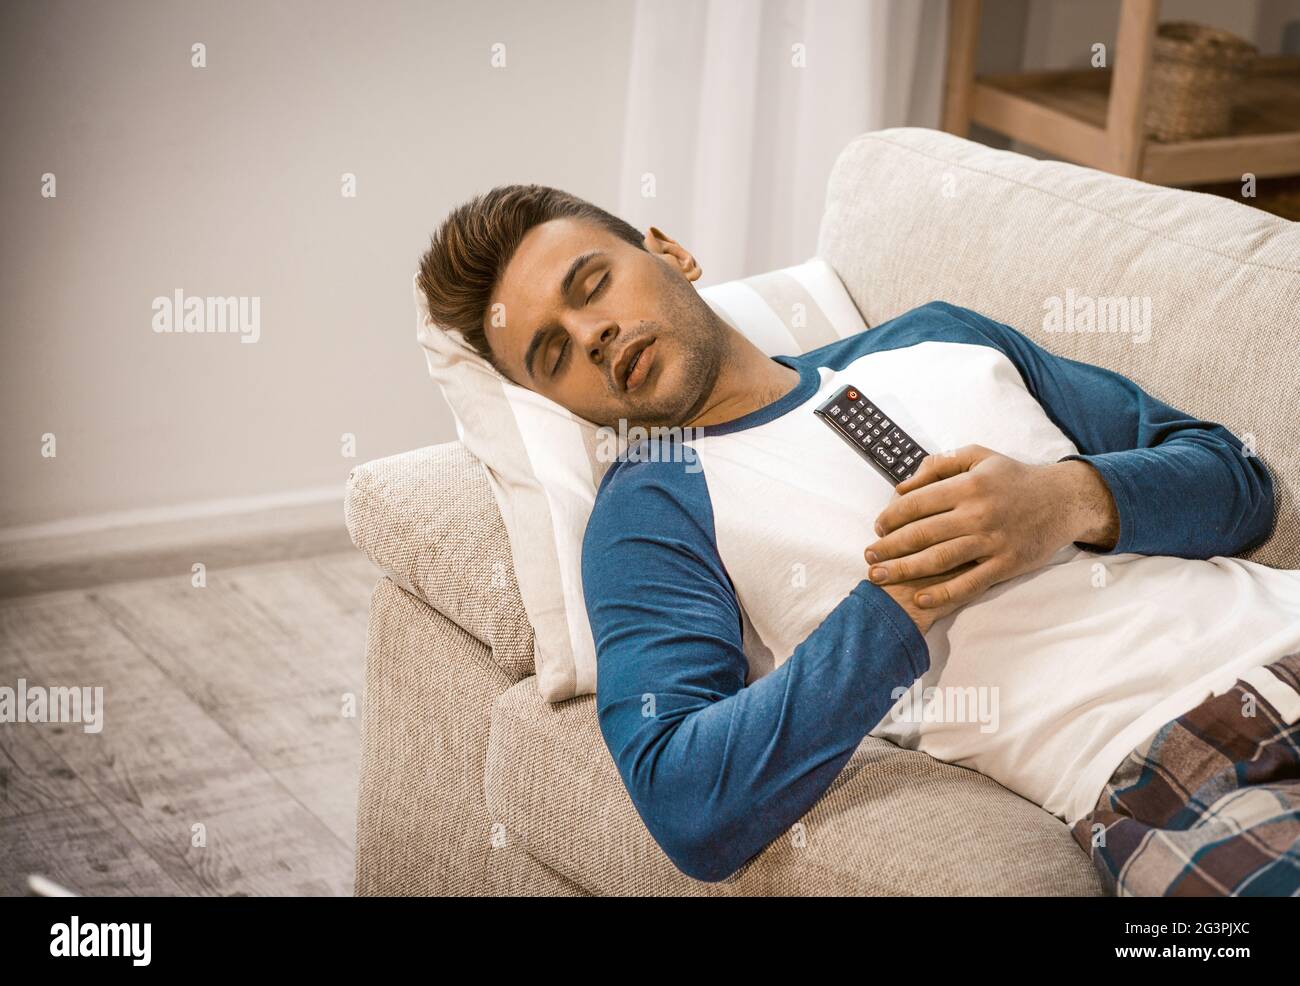 Sleeping Man Relaxing On Sofa Alone At Home Stock Photo